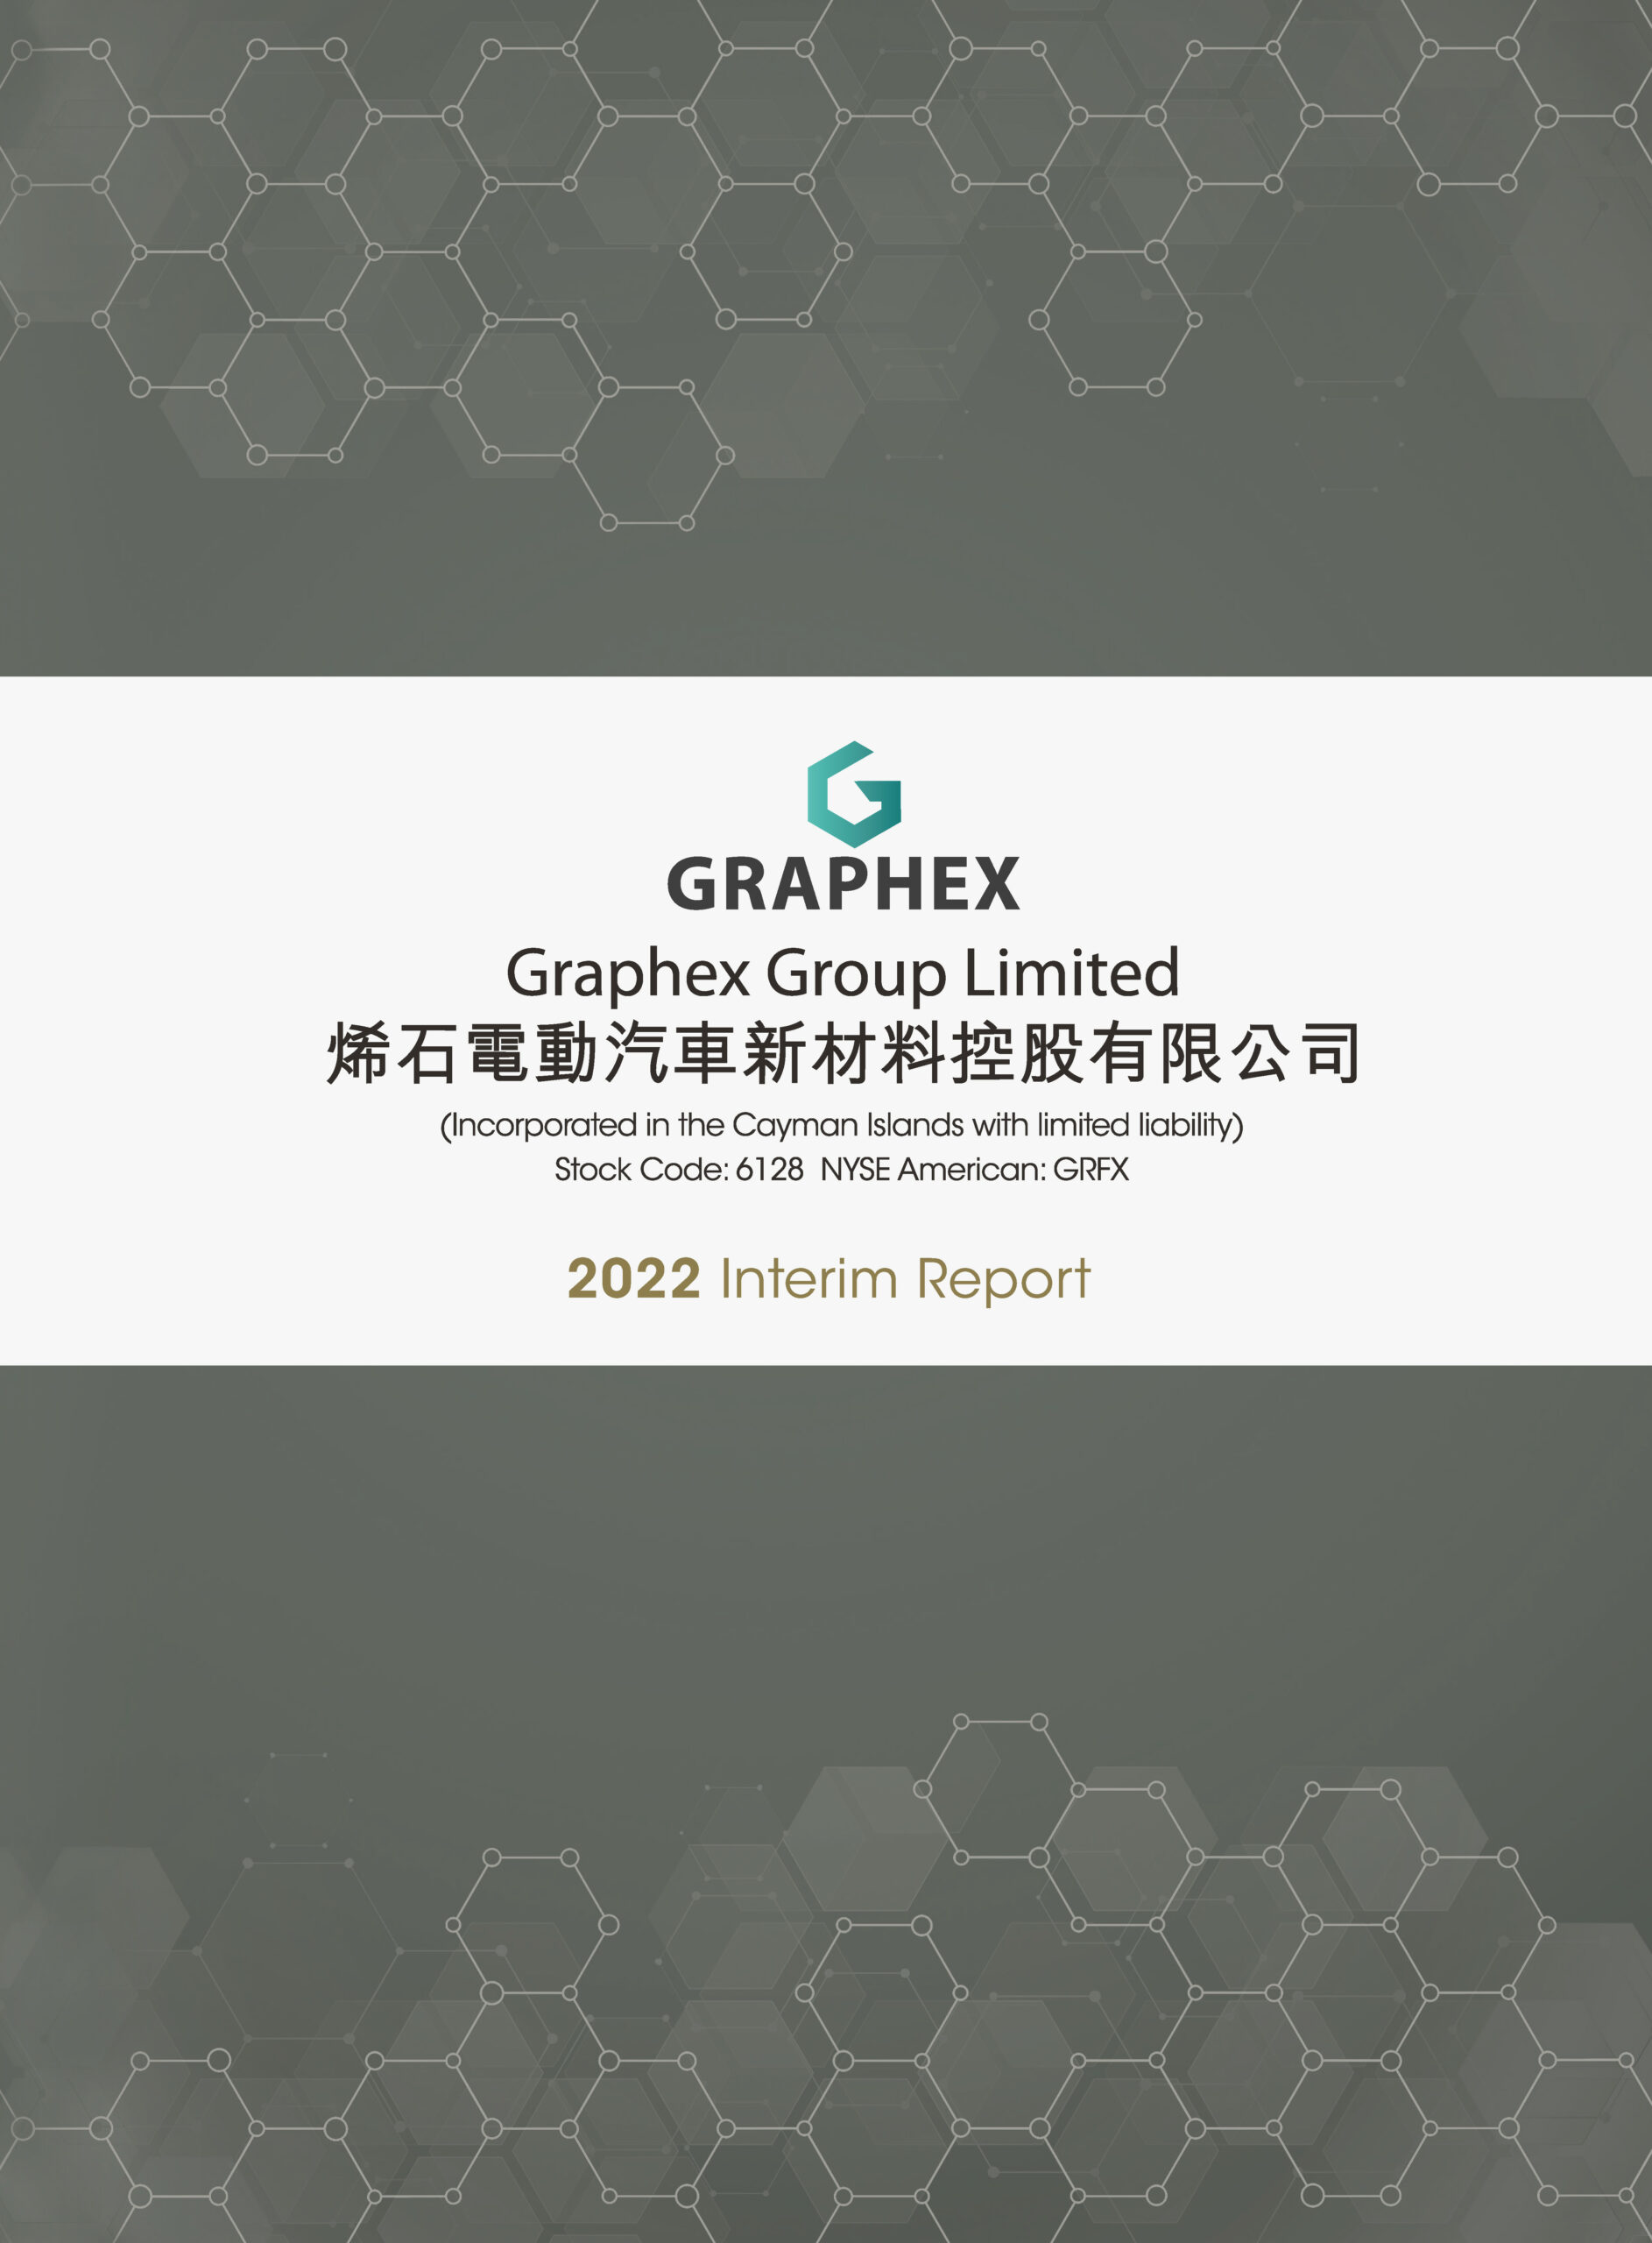 Graphex Group Limited